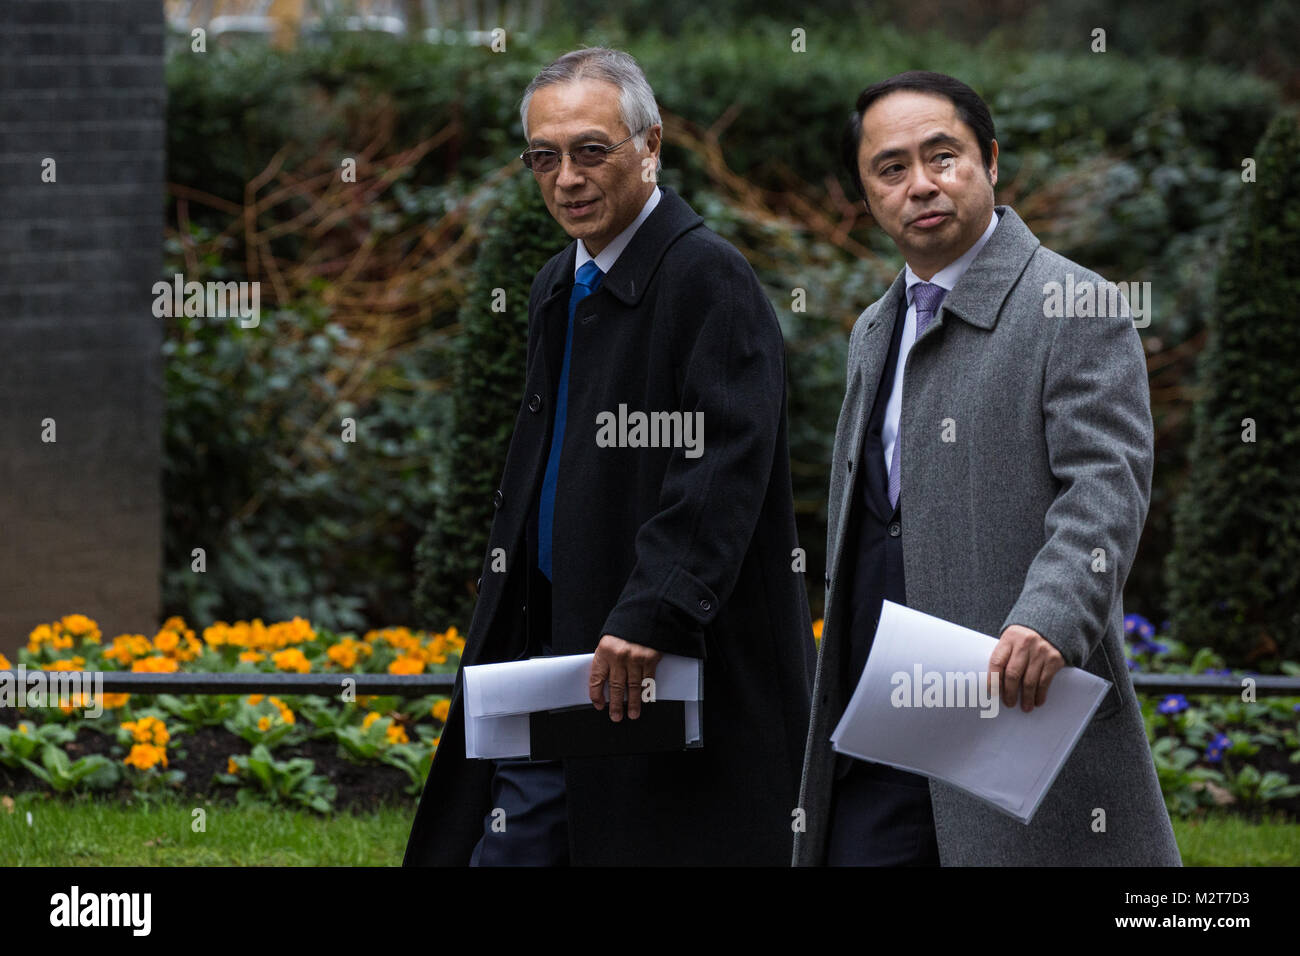 London, UK. 8th February, 2018. Senior representatives of Japanese companies including Yasuo Kashiwagi, Executive Chairman of Nomura Europe International plc, arrive to attend talks hosted by Prime Minister Theresa May, Chancellor of the Exchequer Philip Hammond, Secretary of State for International Trade Liam Fox and Secretary of State for Business, Energy and Industrial Strategy Greg Clark Credit: Mark Kerrison/Alamy Live News Stock Photo